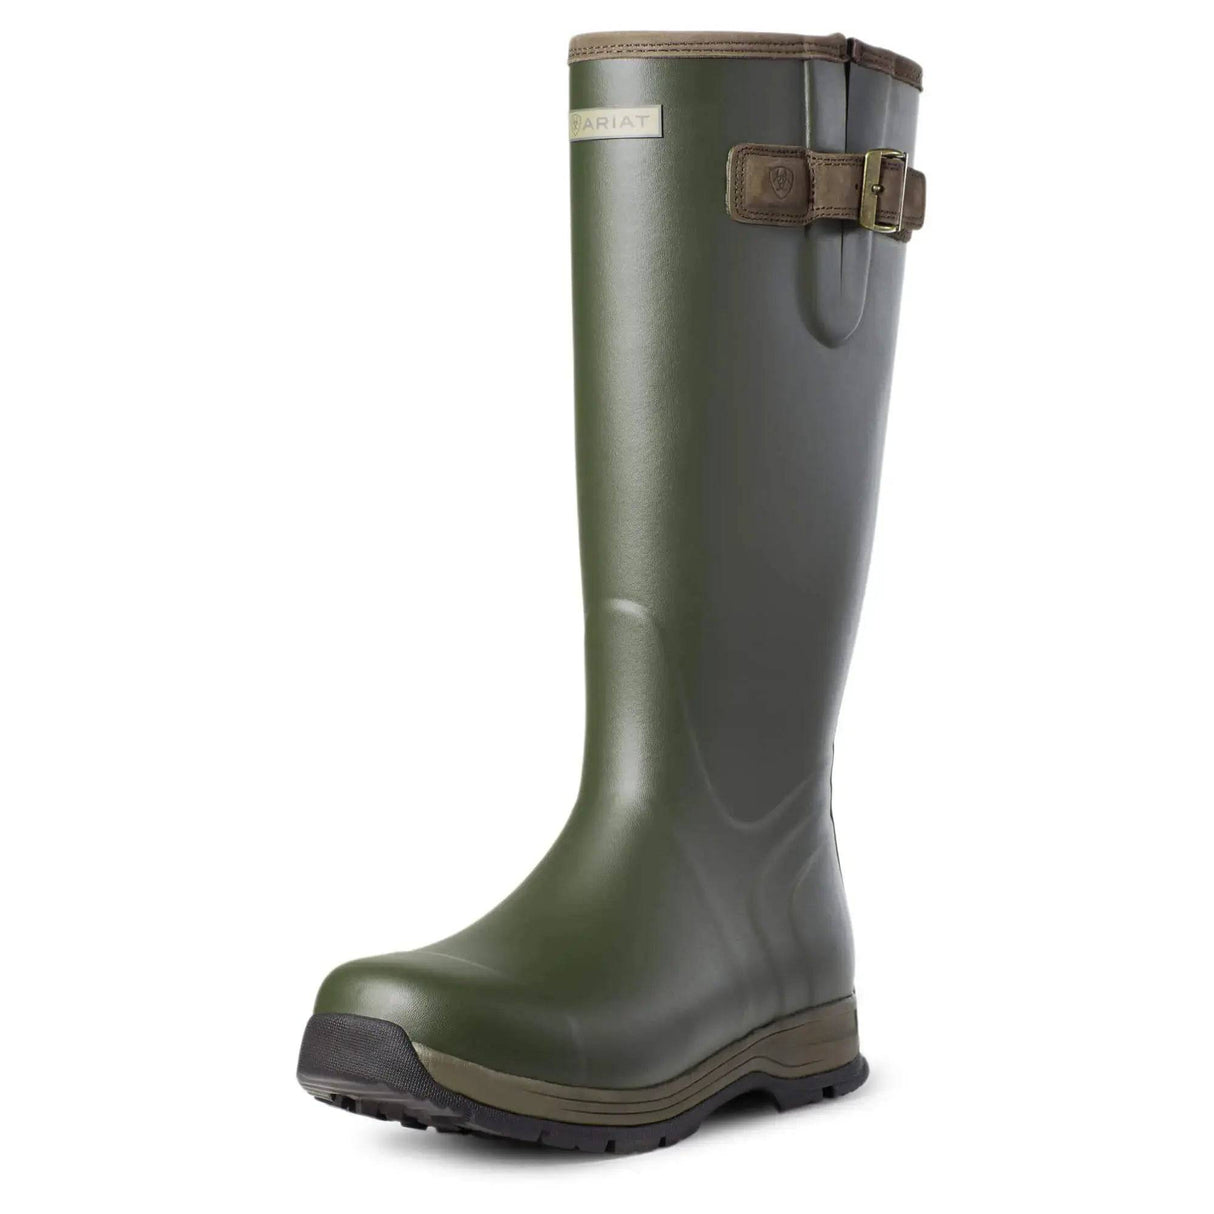 Ariat Burford Insulated Rubber Boots Gents 41 EU / 7 UK Ariat Country Boots Barnstaple Equestrian Supplies